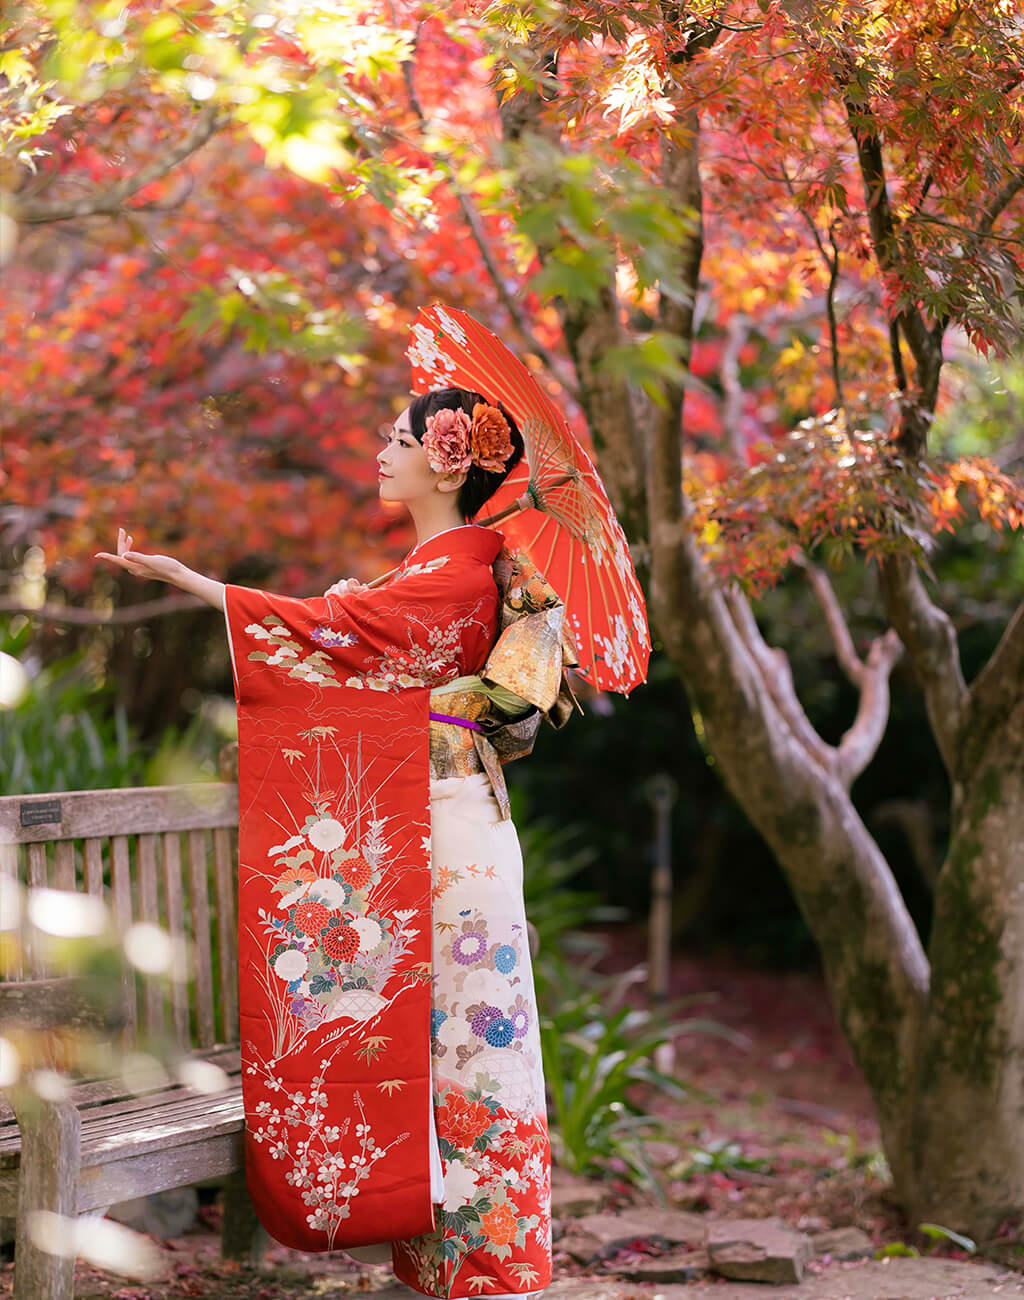 Woman wearing traditional kimono and with a parasol, among red-leaved maples